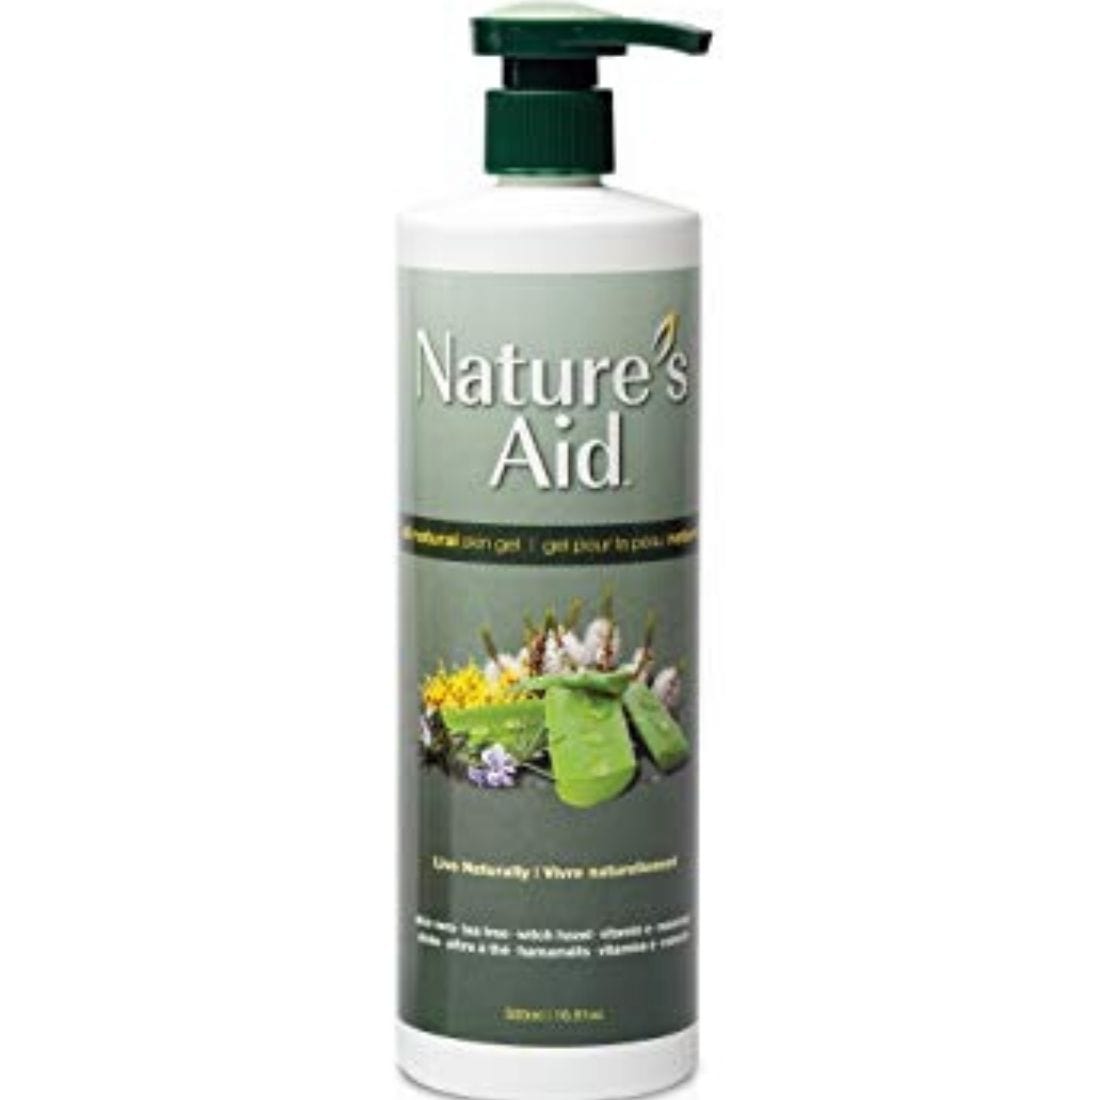 Nature's Aid True Natural Skin Gel (4 Sizes Available)